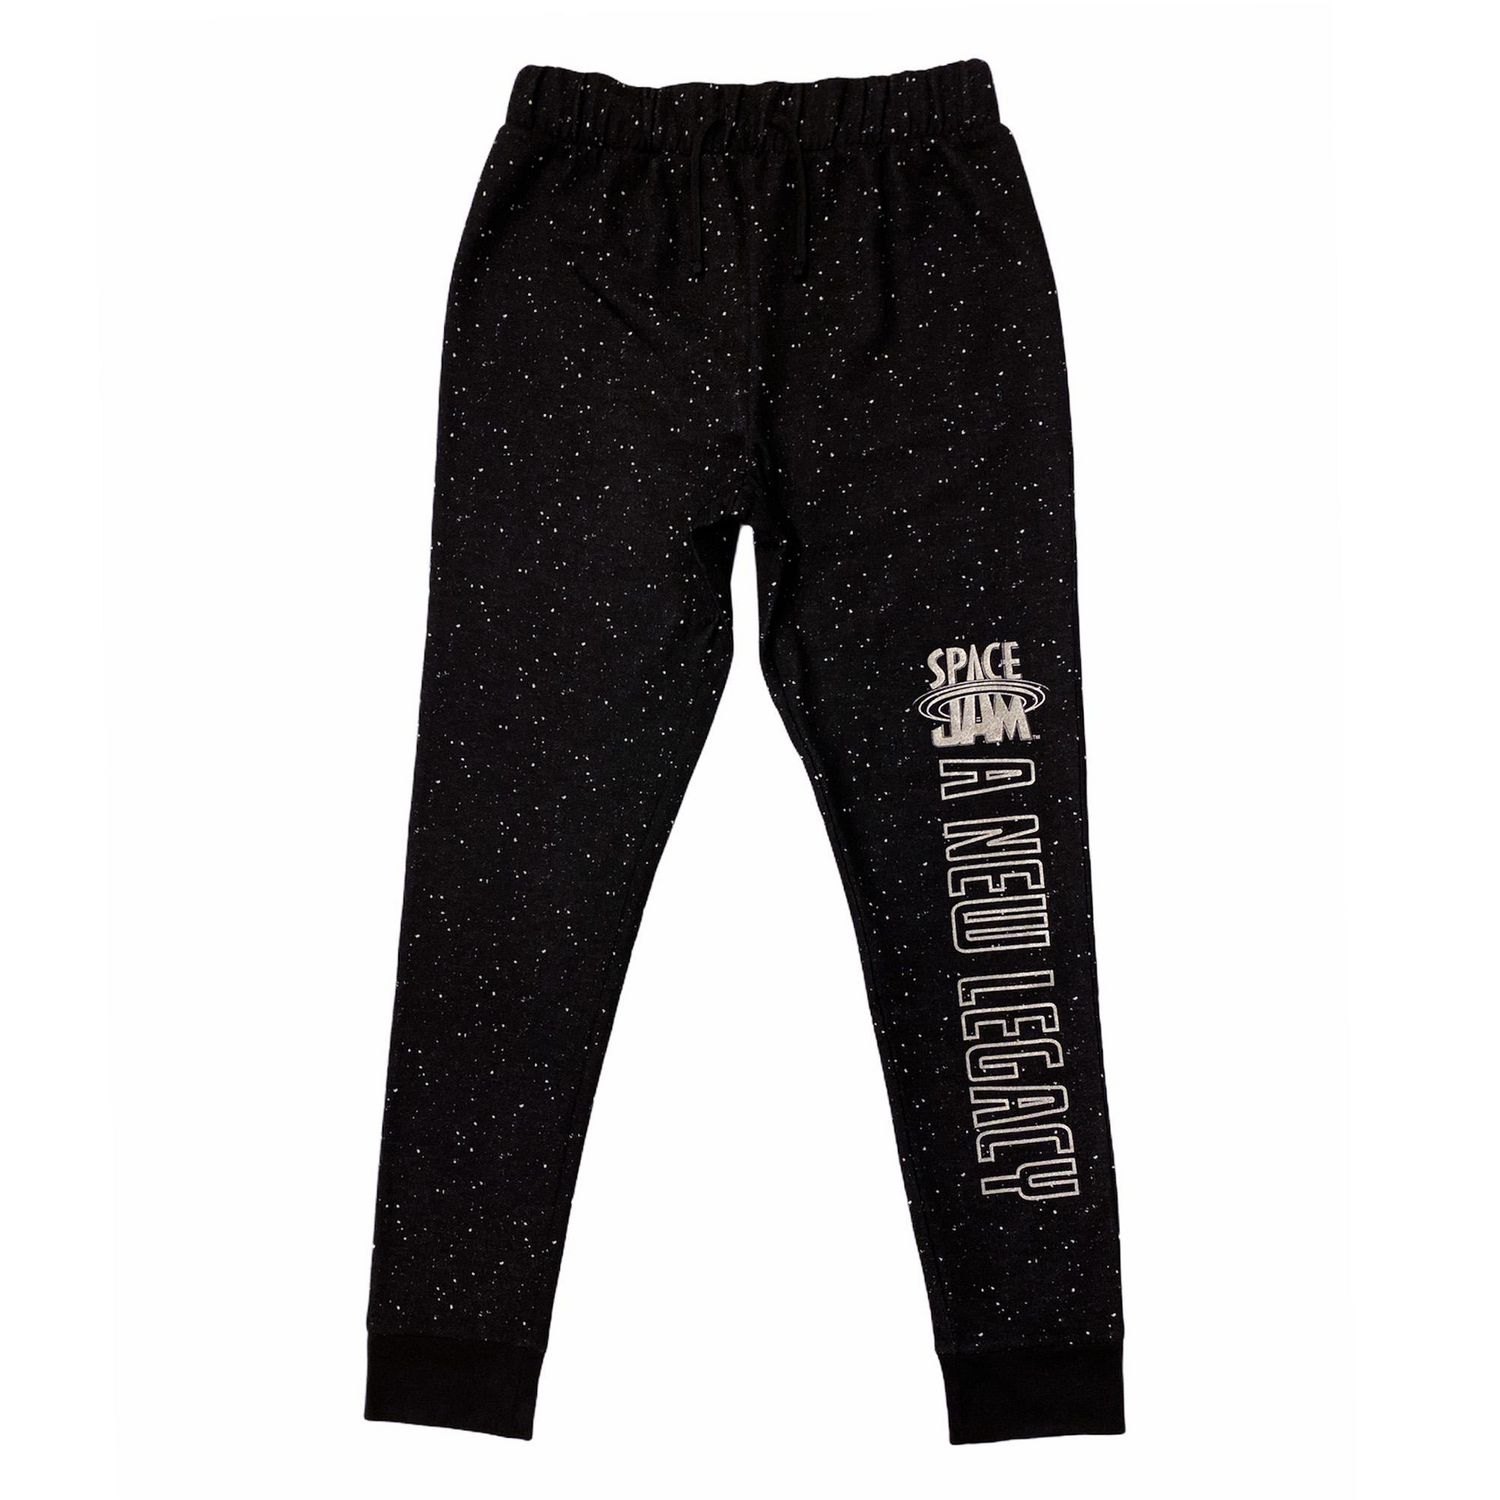 Space Jam Boy's long jogger pant with elastic waist and drawstring